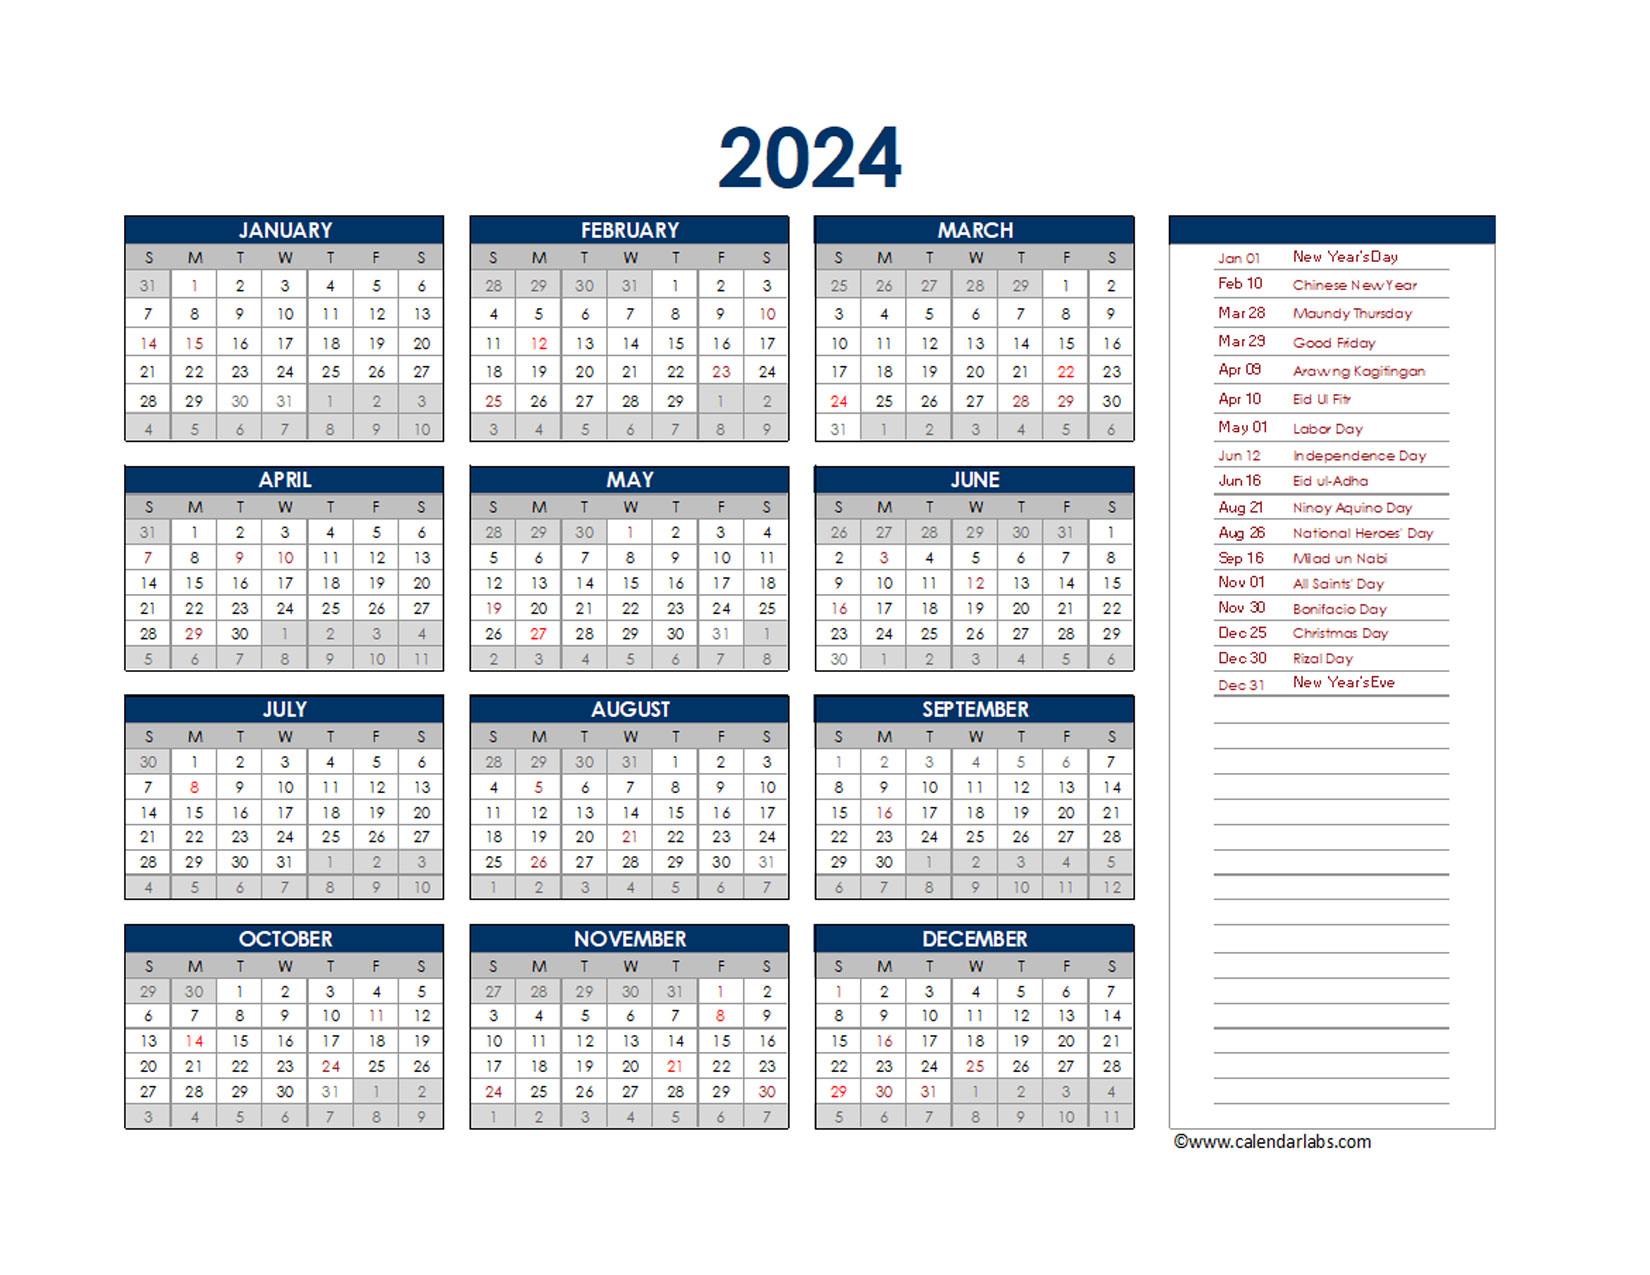 2024 Holiday Calendar In Philippines Currency Cyndi Dorelle